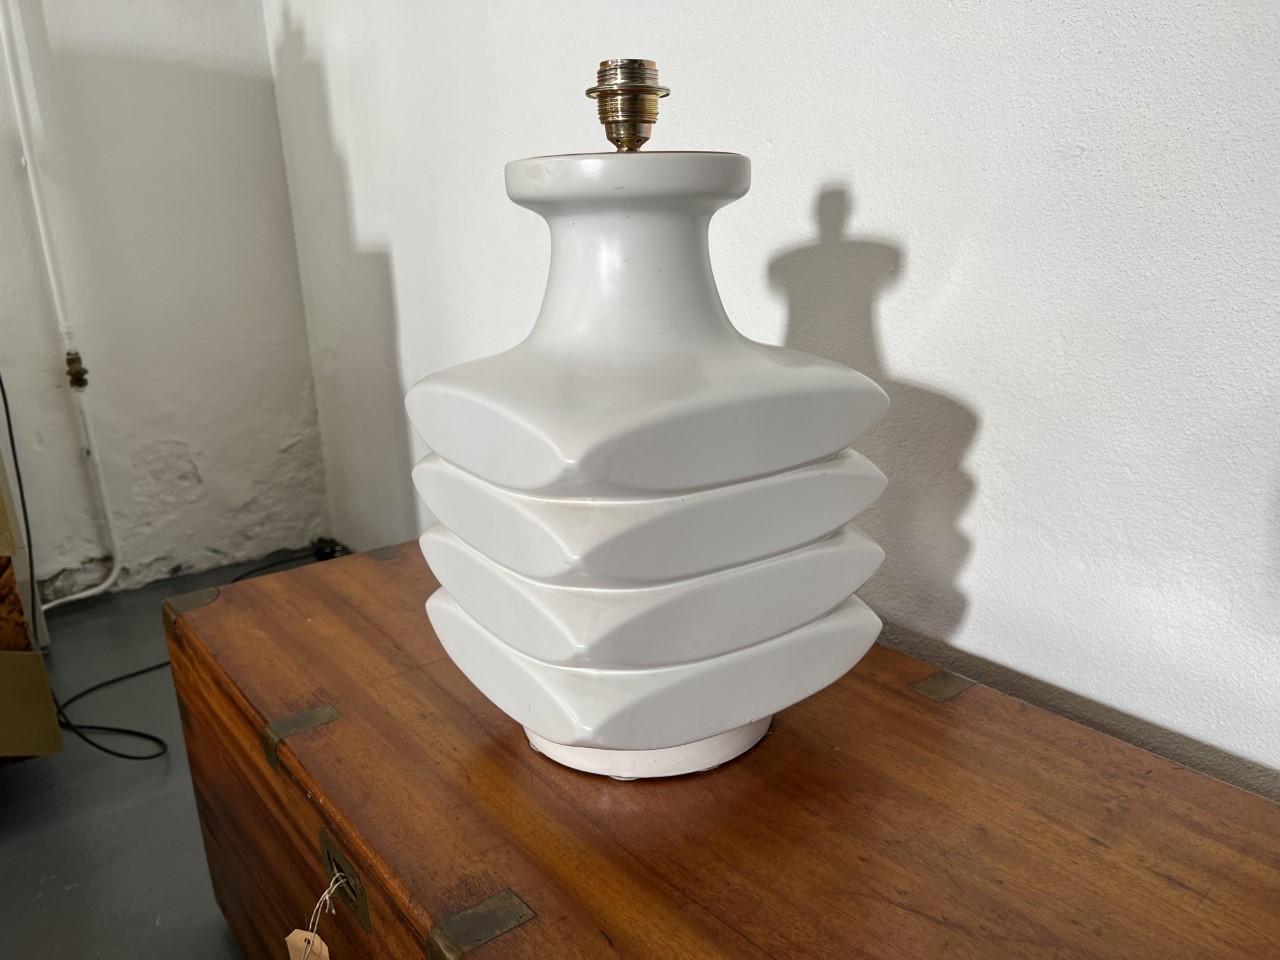 Large 1970s Ceramic Brutalist Table Lamp by Cari Zalloni For Sale 4